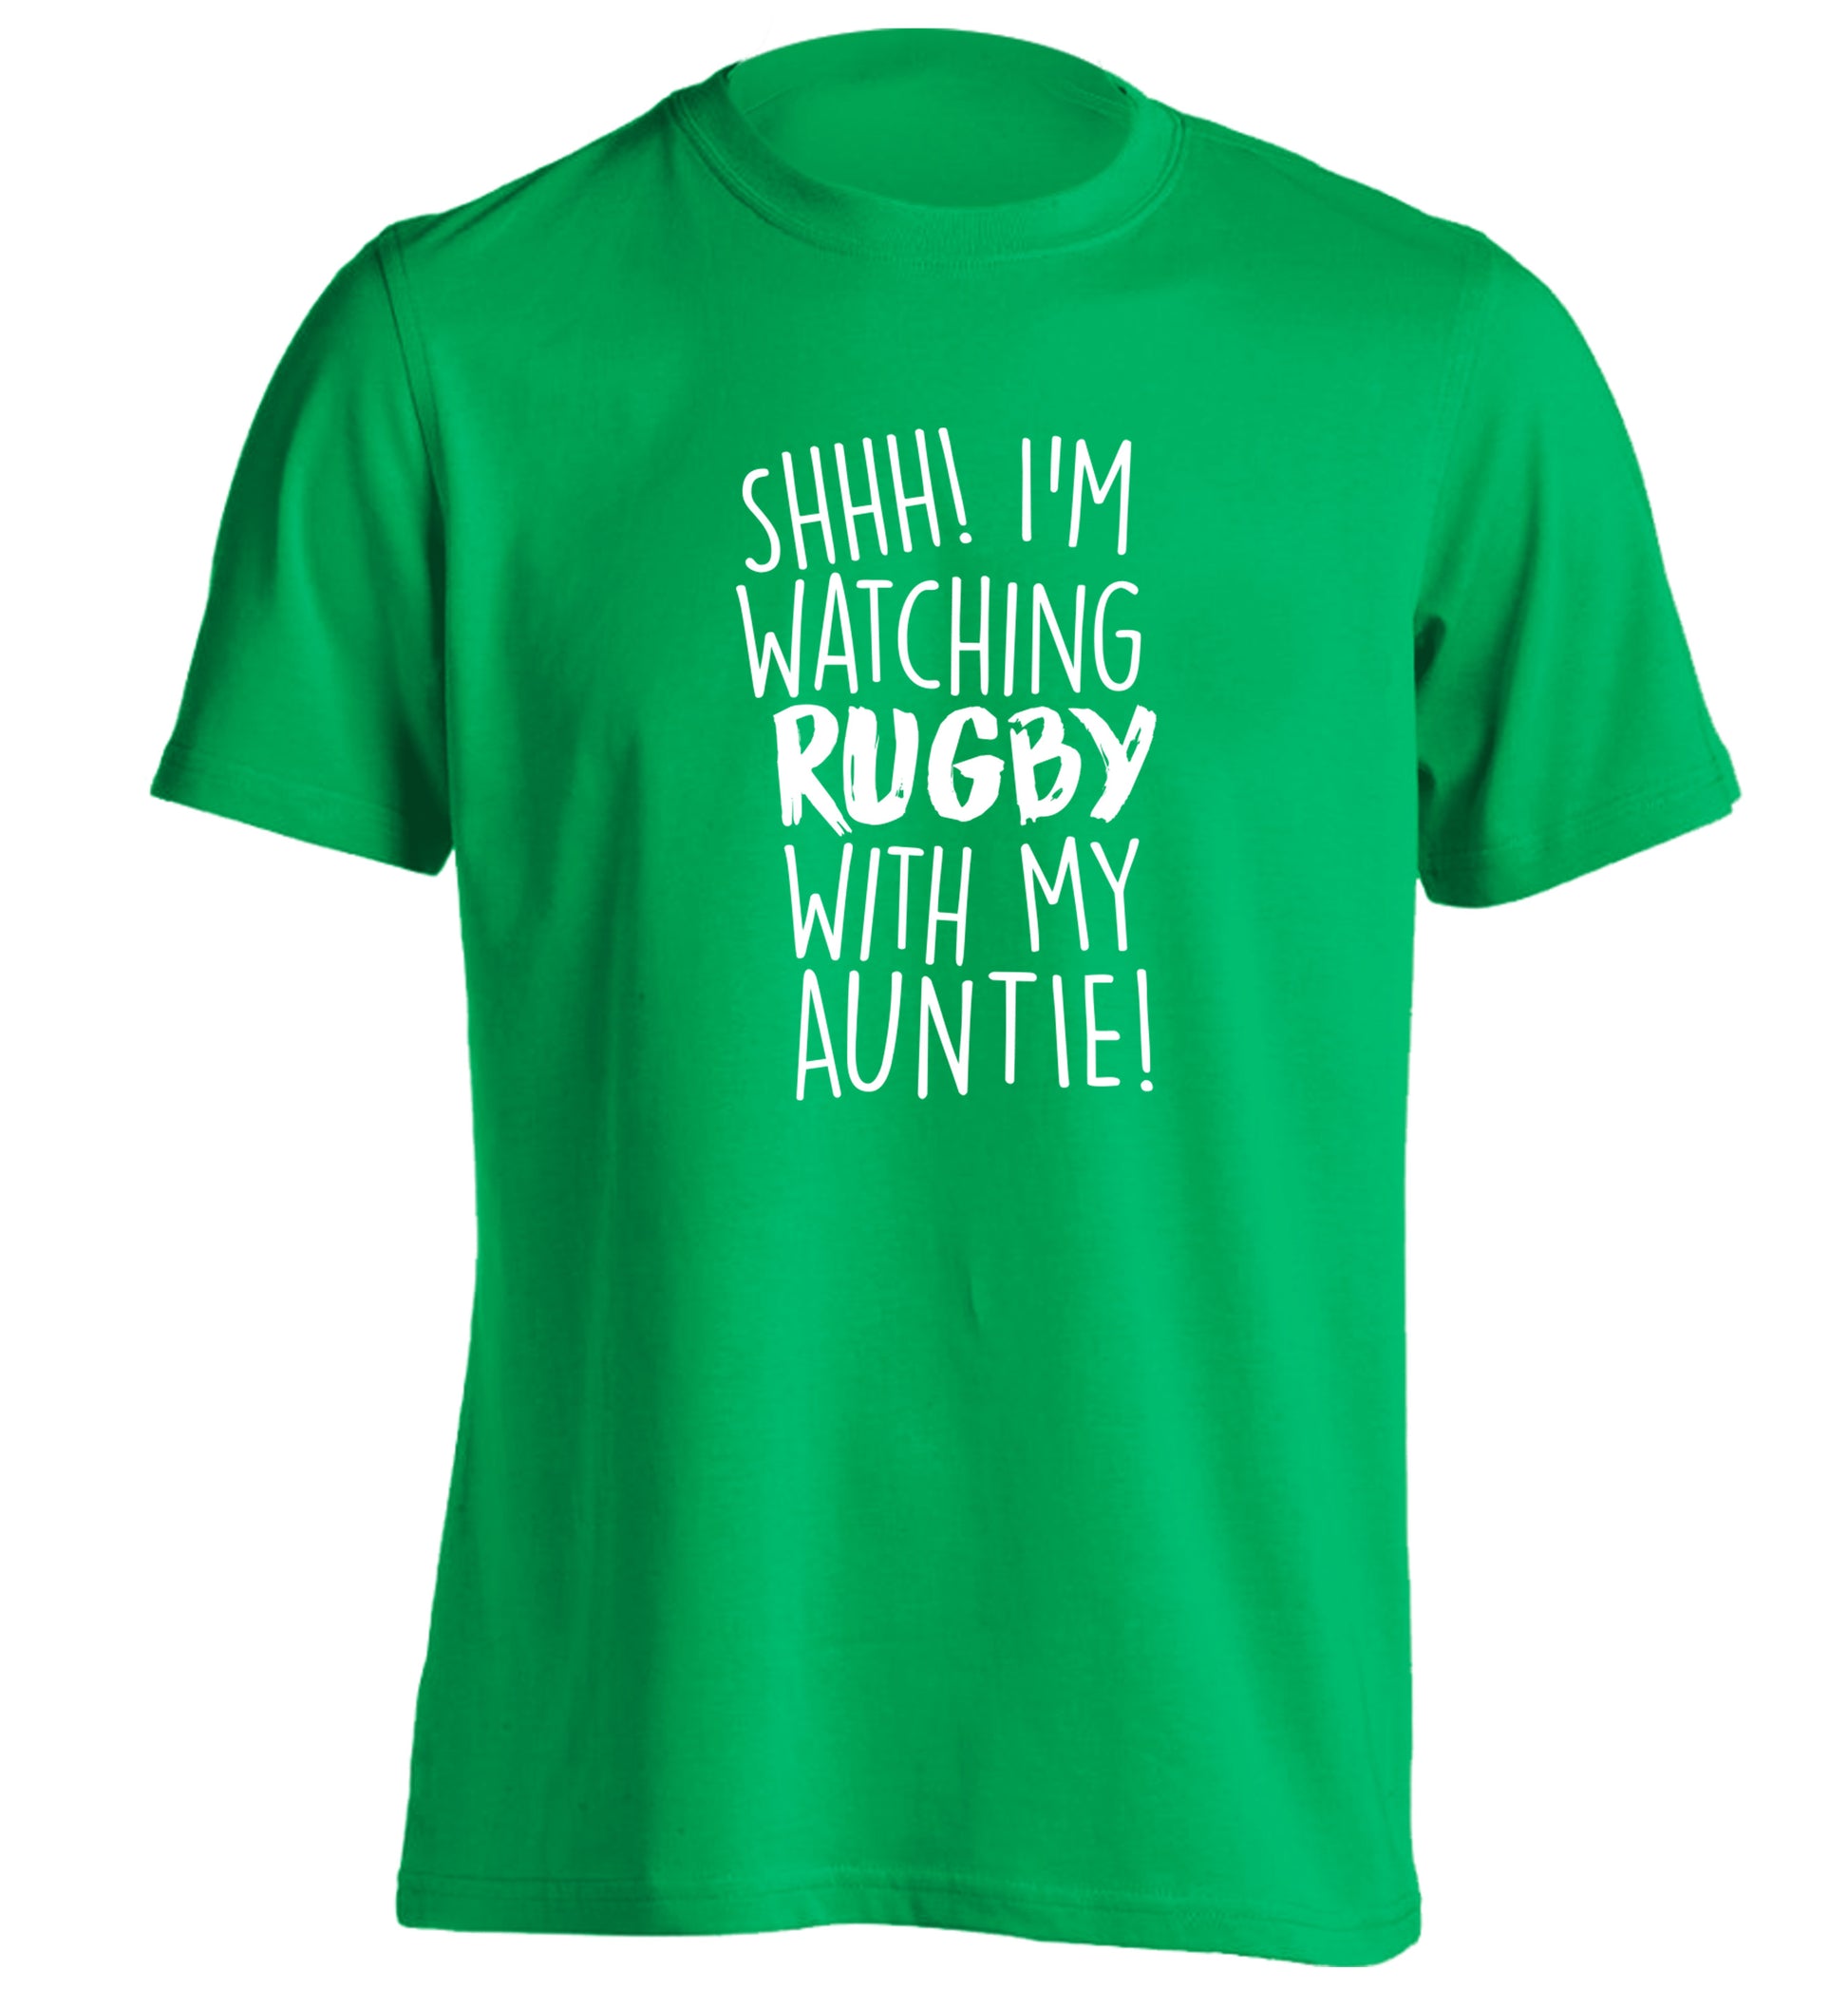 Shhh I'm watchin rugby with my auntie adults unisex green Tshirt 2XL